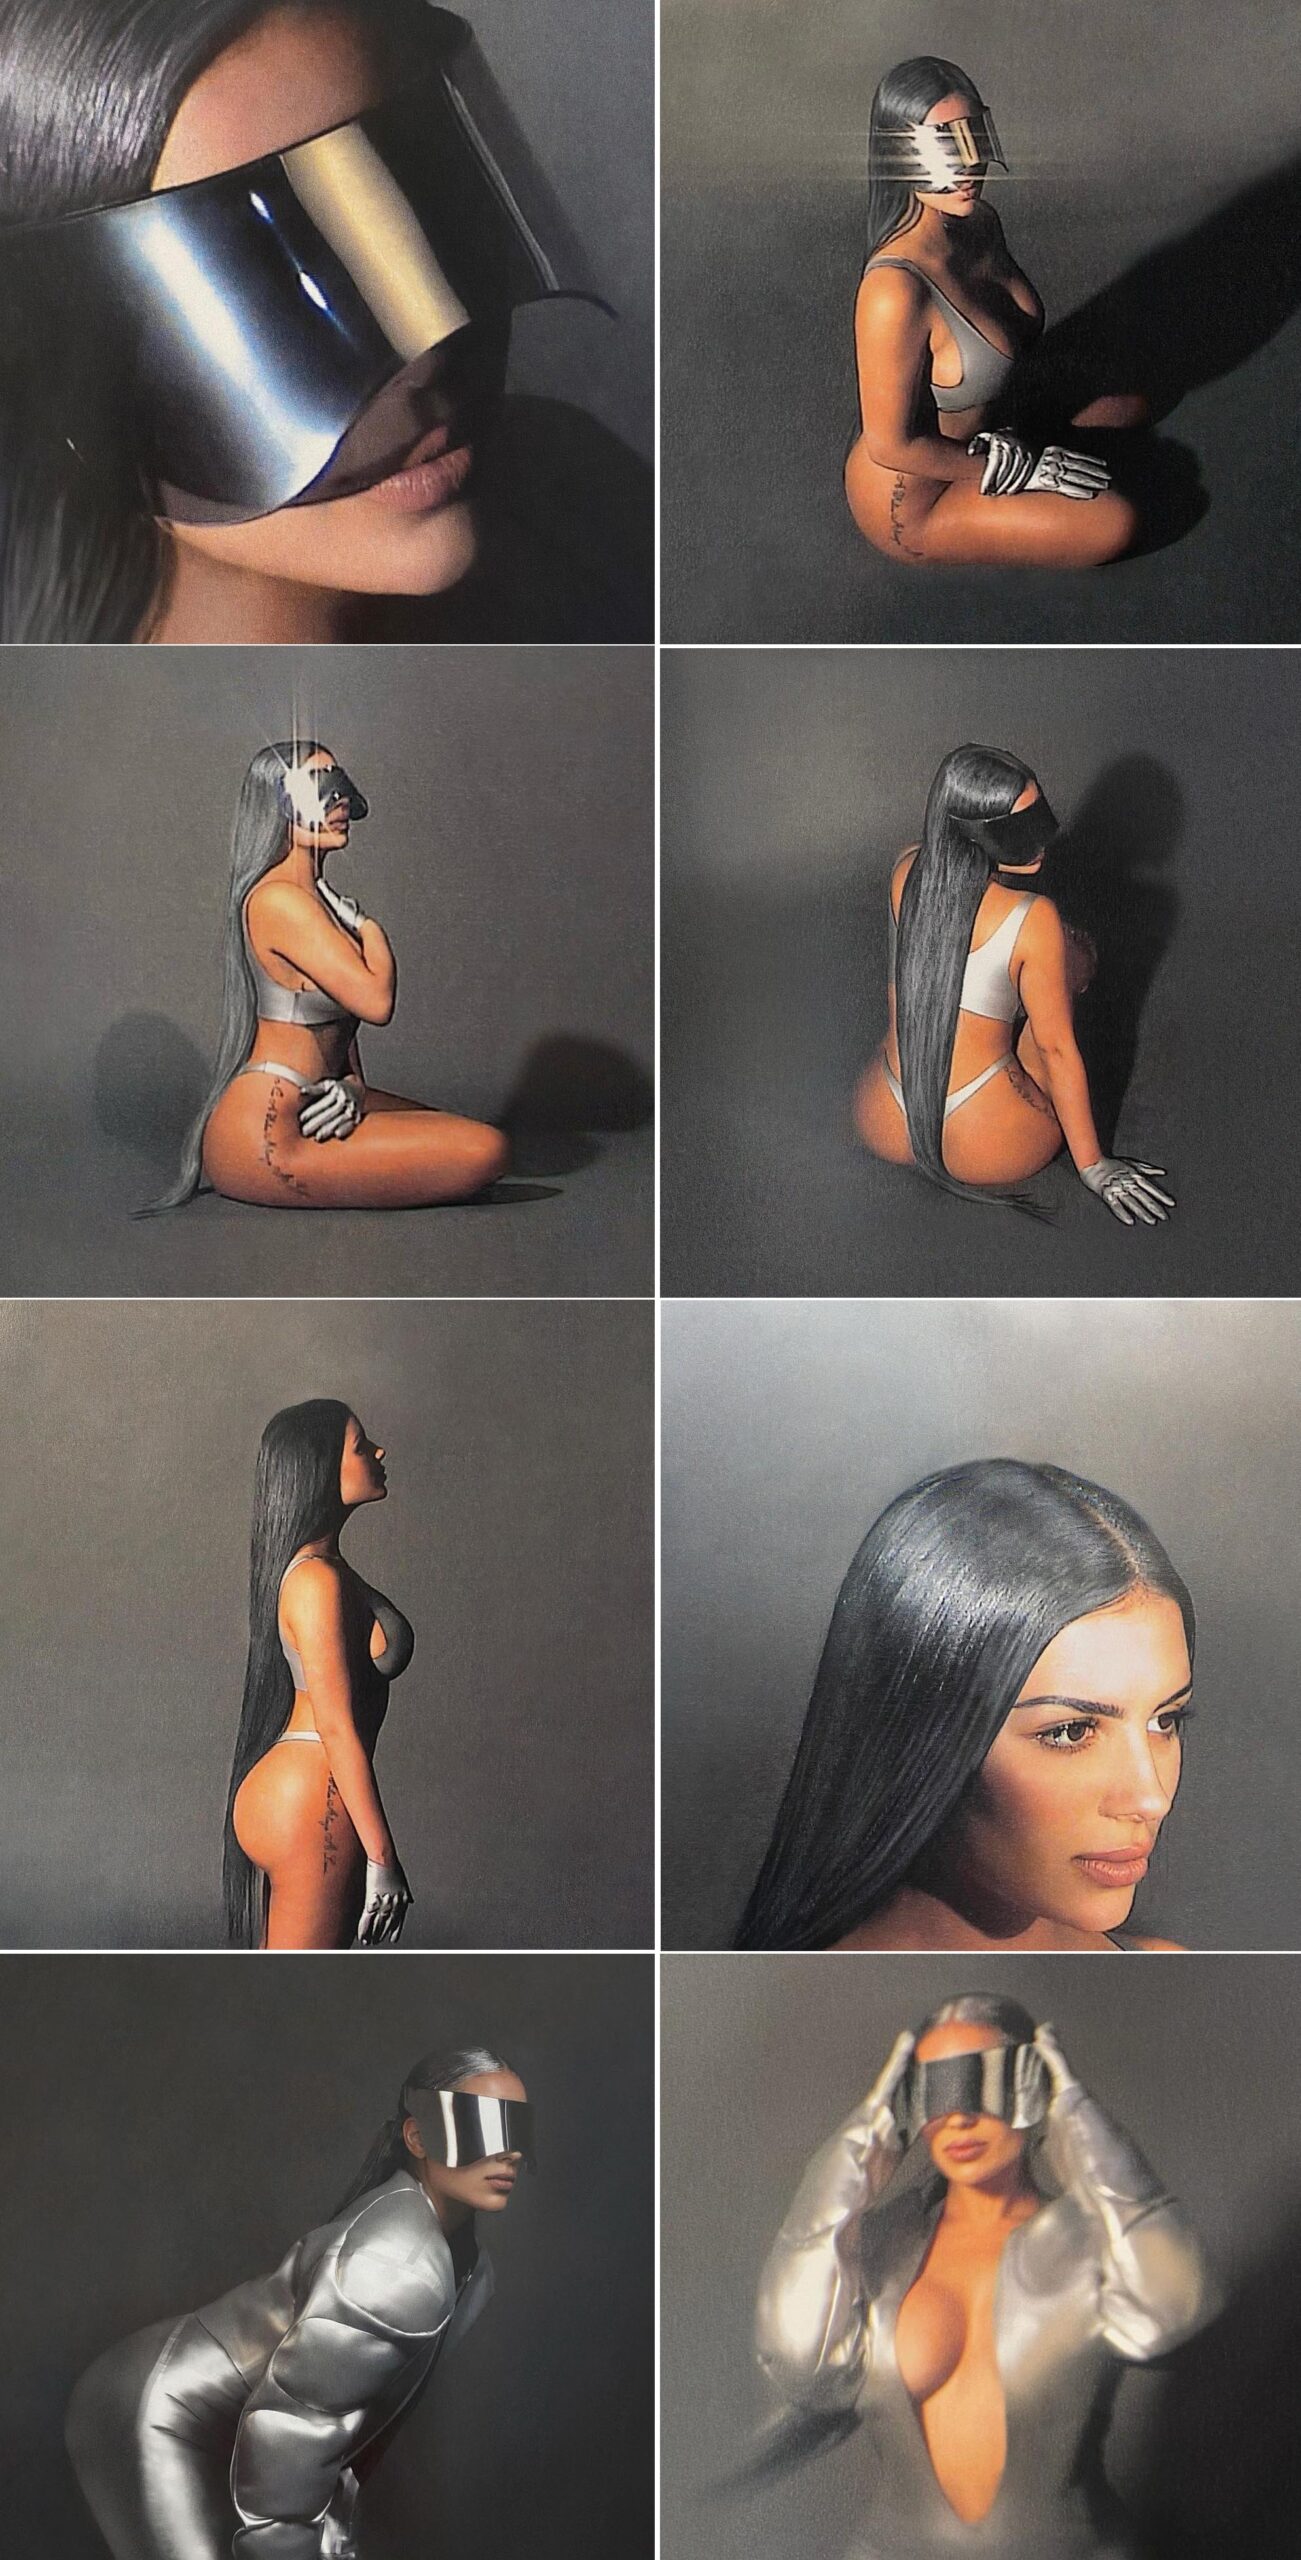 Chaney Jones Kanye West Kim Kardashian Sports Illustrated Swimsuit Edition 2022 issue pictures